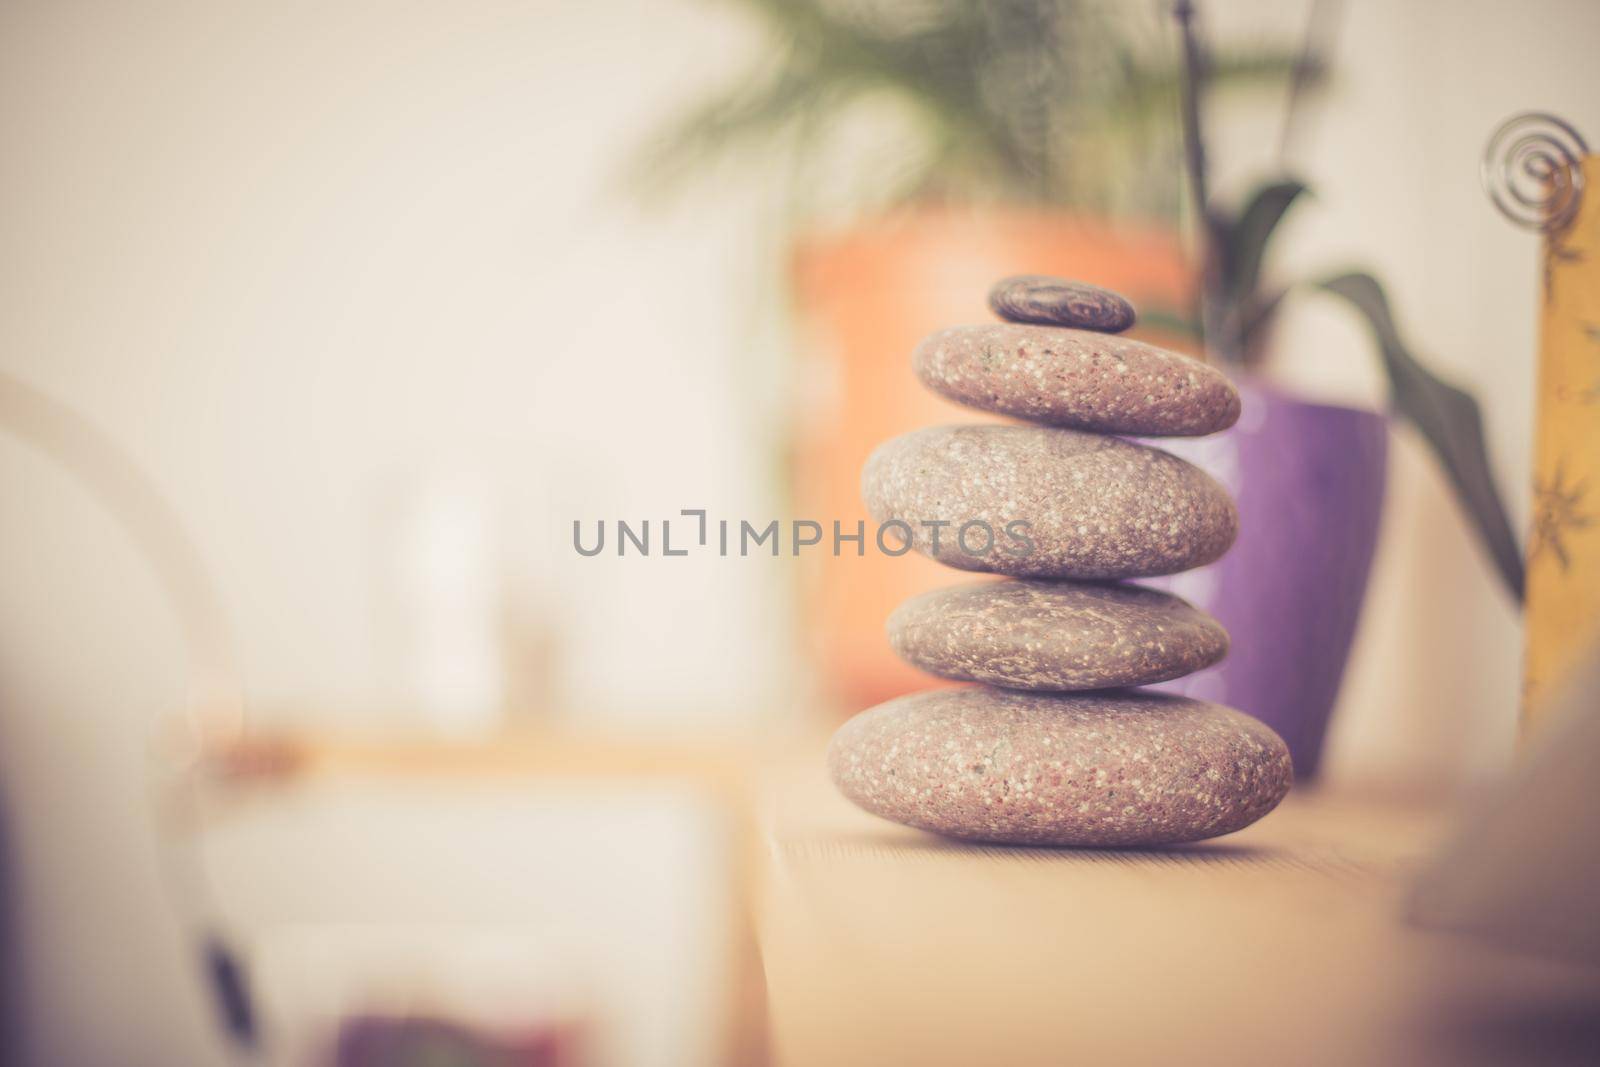 Feng Shui: Stone cairn in the living room, balance and relaxation by Daxenbichler